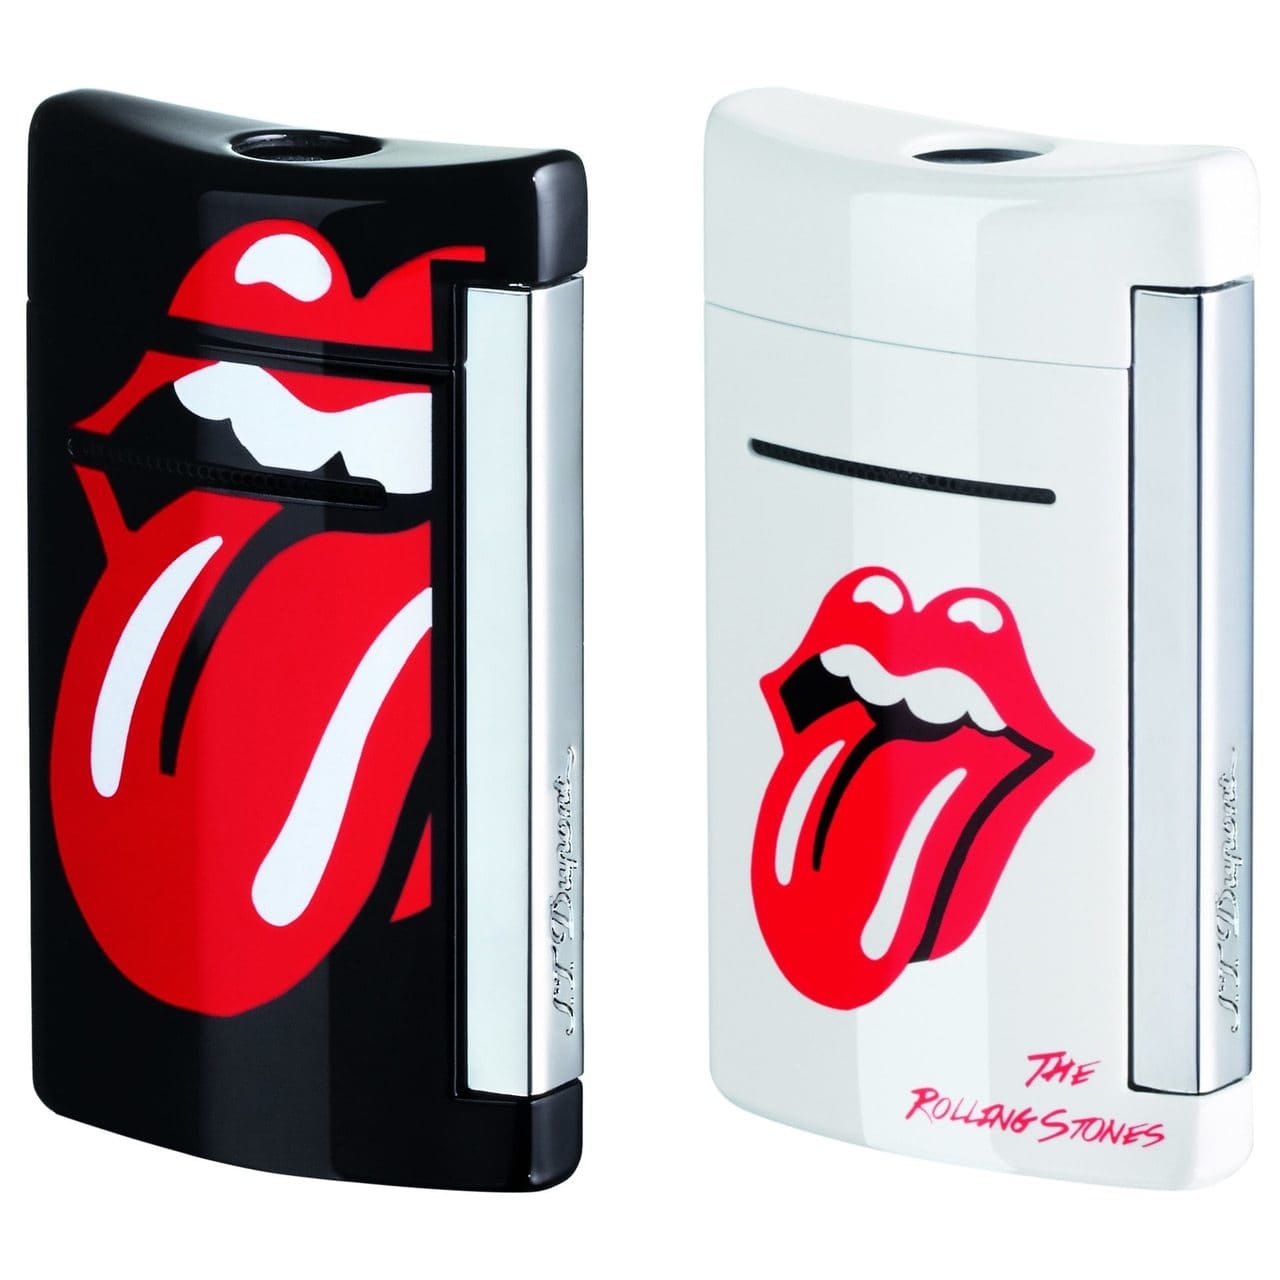 Limited Edition S.T. Dupont Rolling Stones Minijet Classic Torch Flame Chrome Finish Lighter 010110RS 3597390234285 010109RS 3597390234278